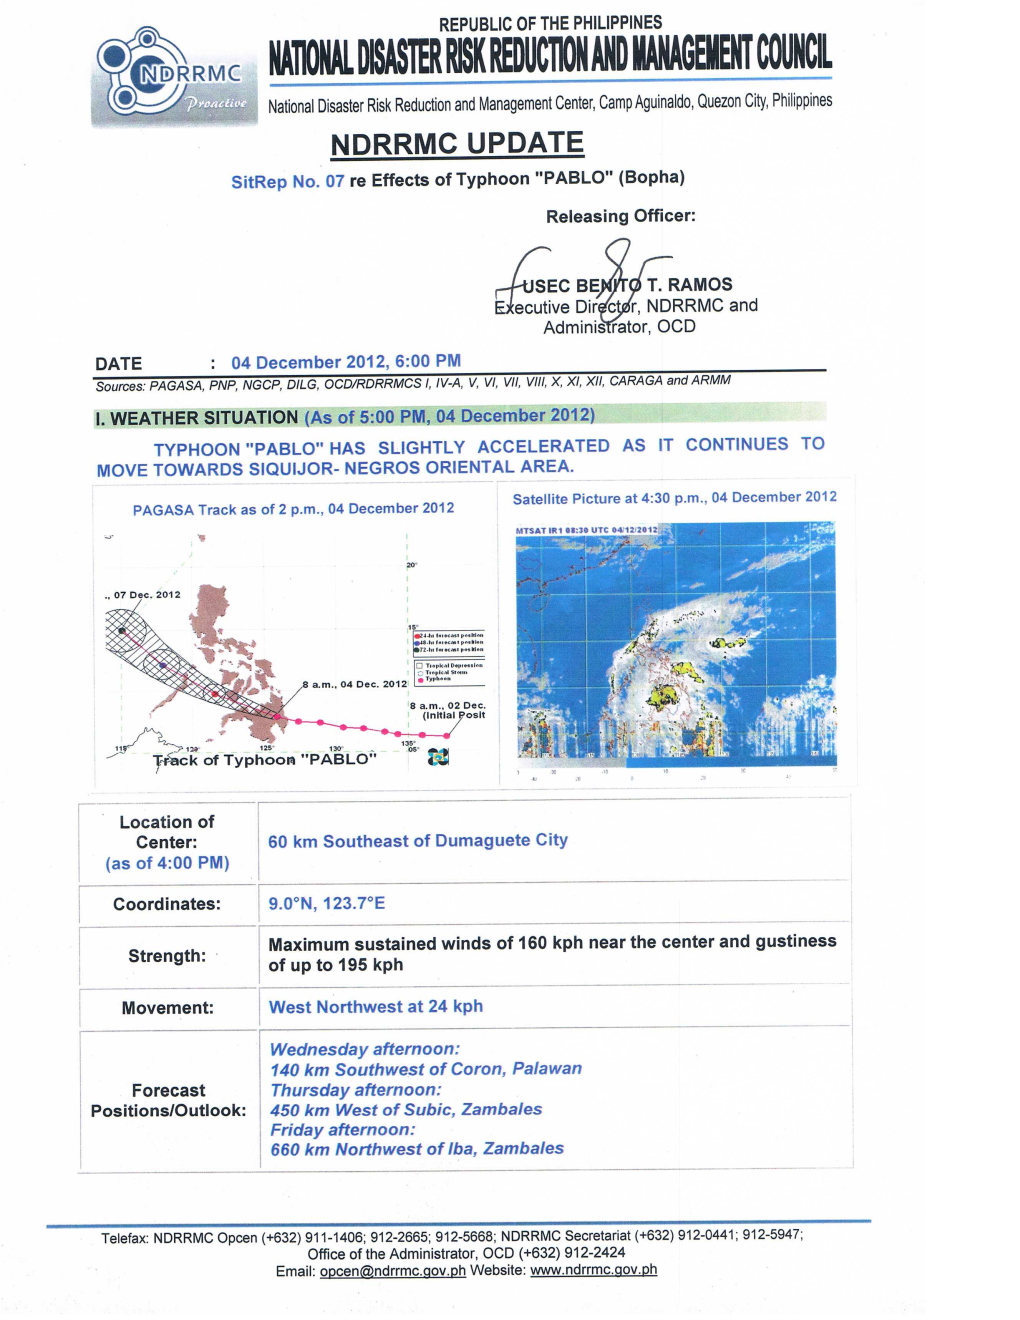 UPDATE Re Sitrep No.7 Re Typhoon PABLO As of 04 Dec 2012